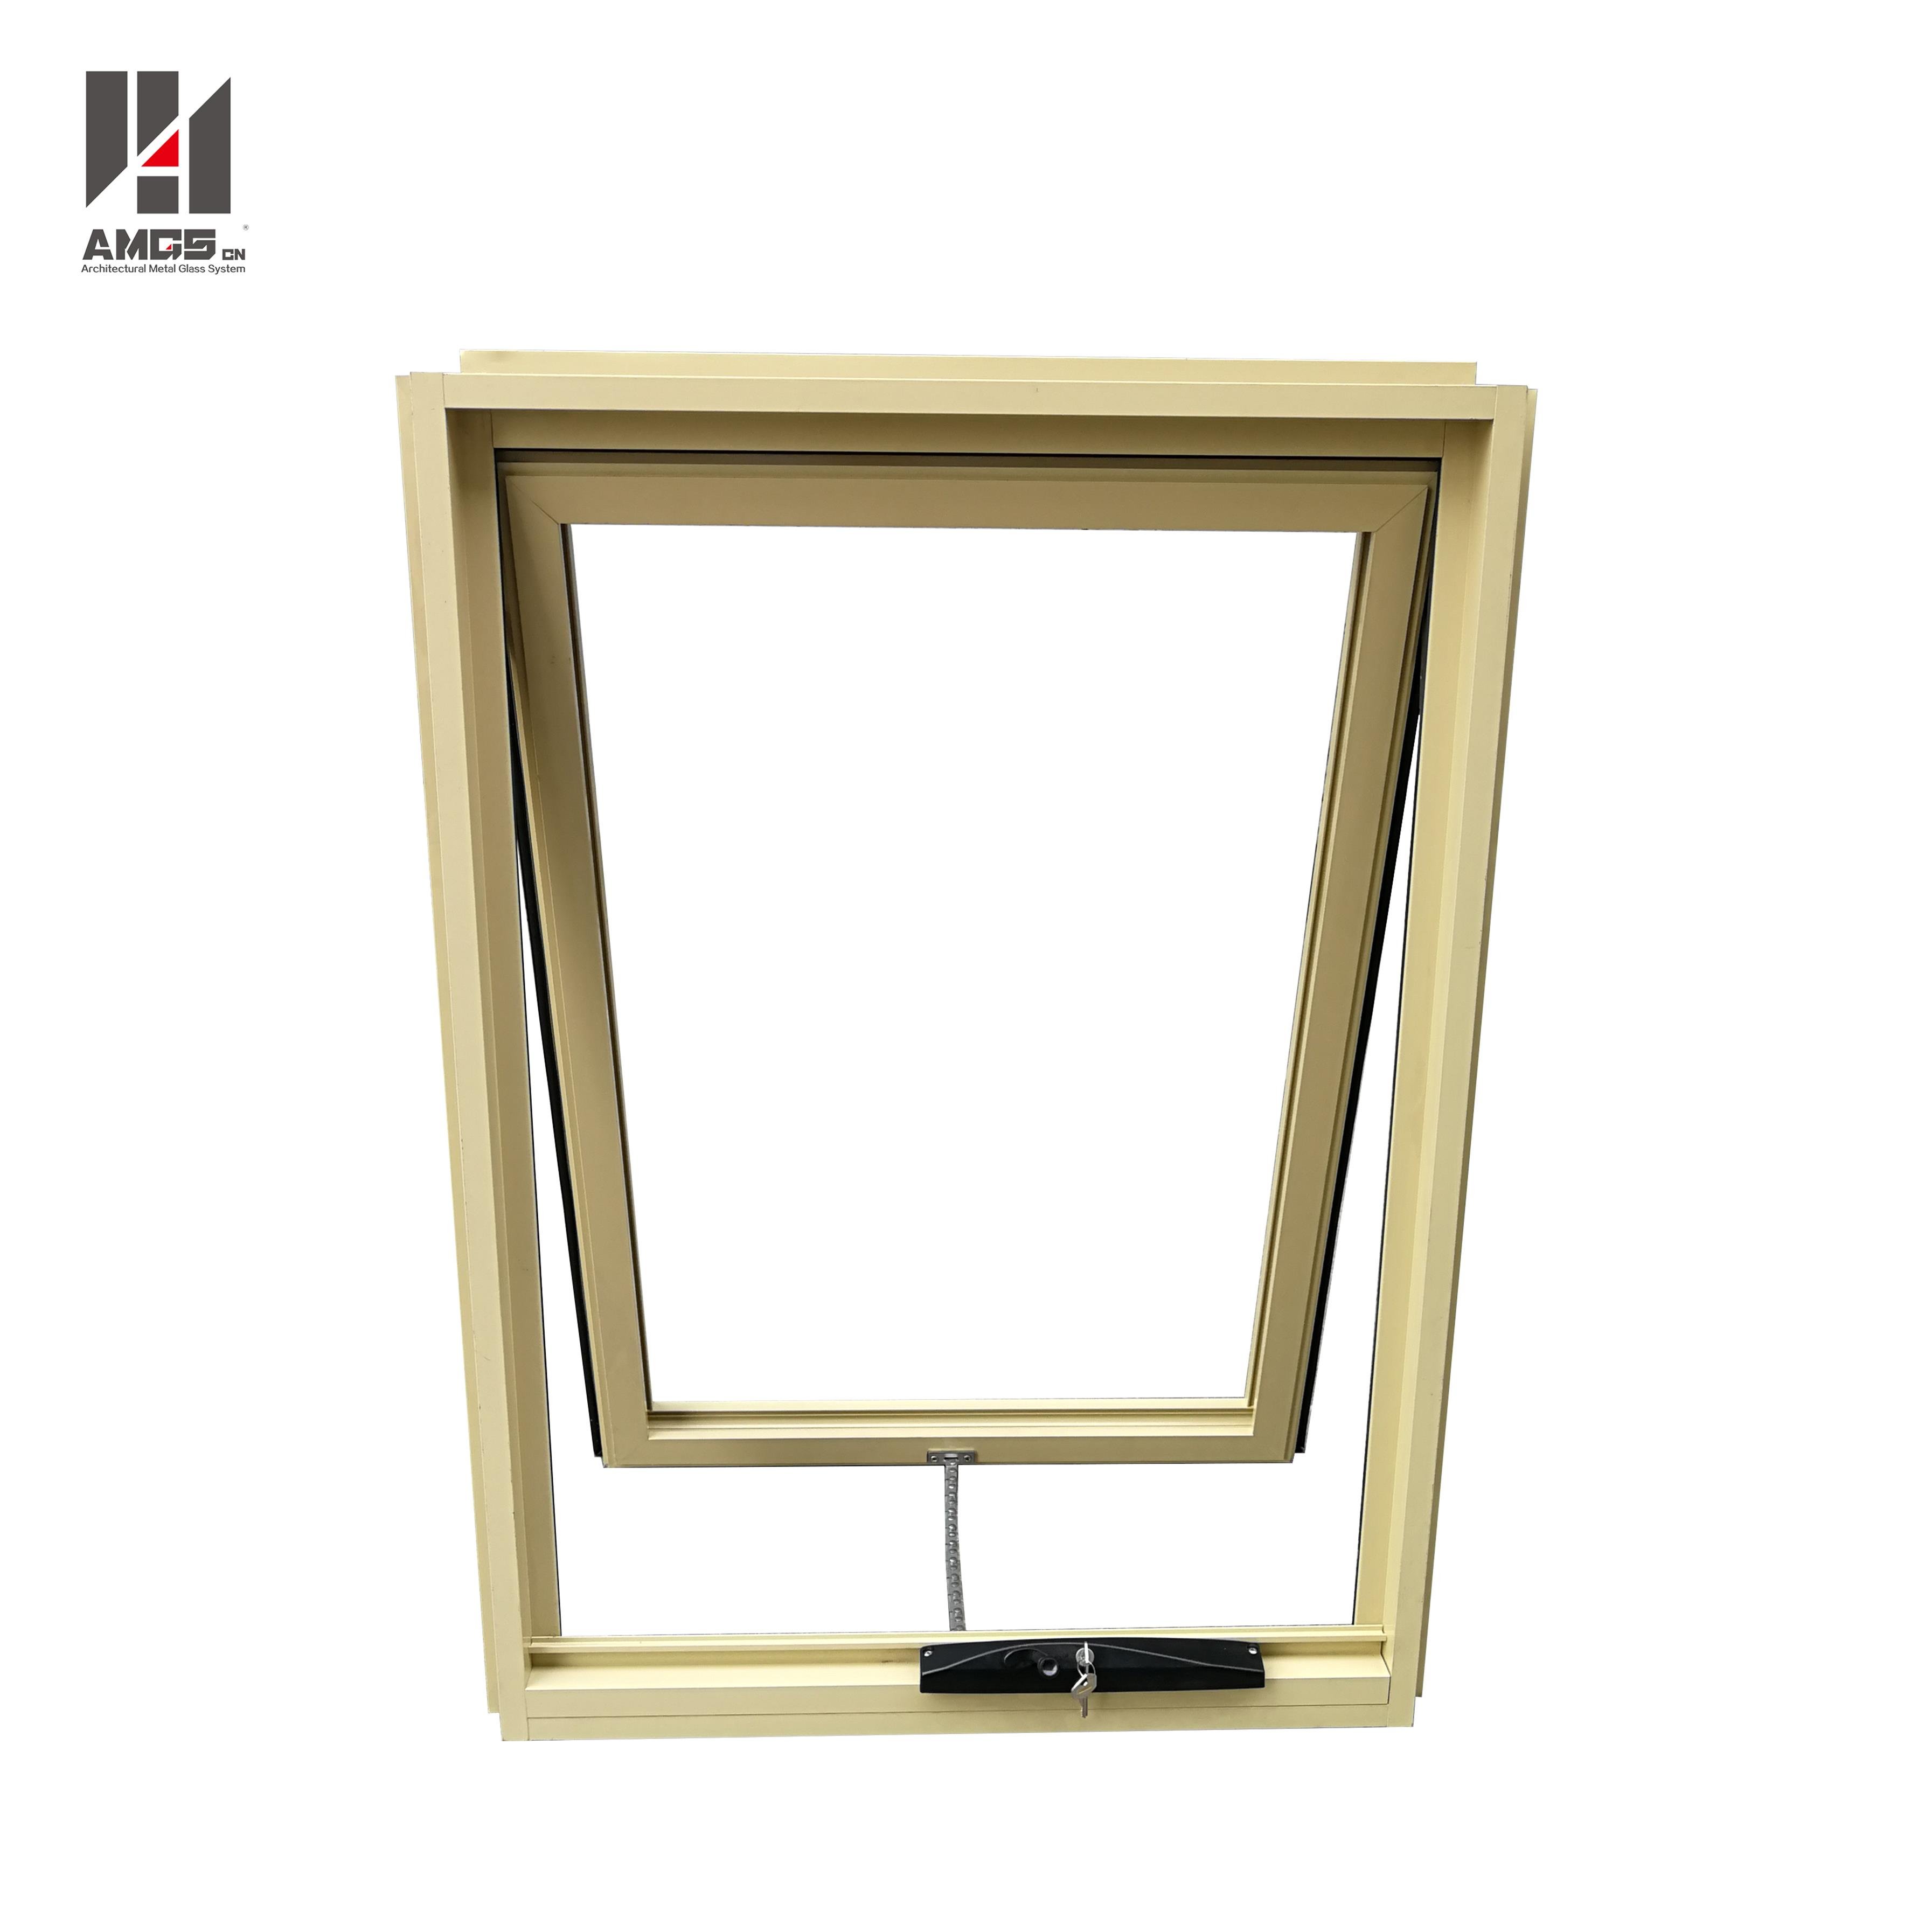 Aluminum Awning Window For Australian Standard With Chain Winder